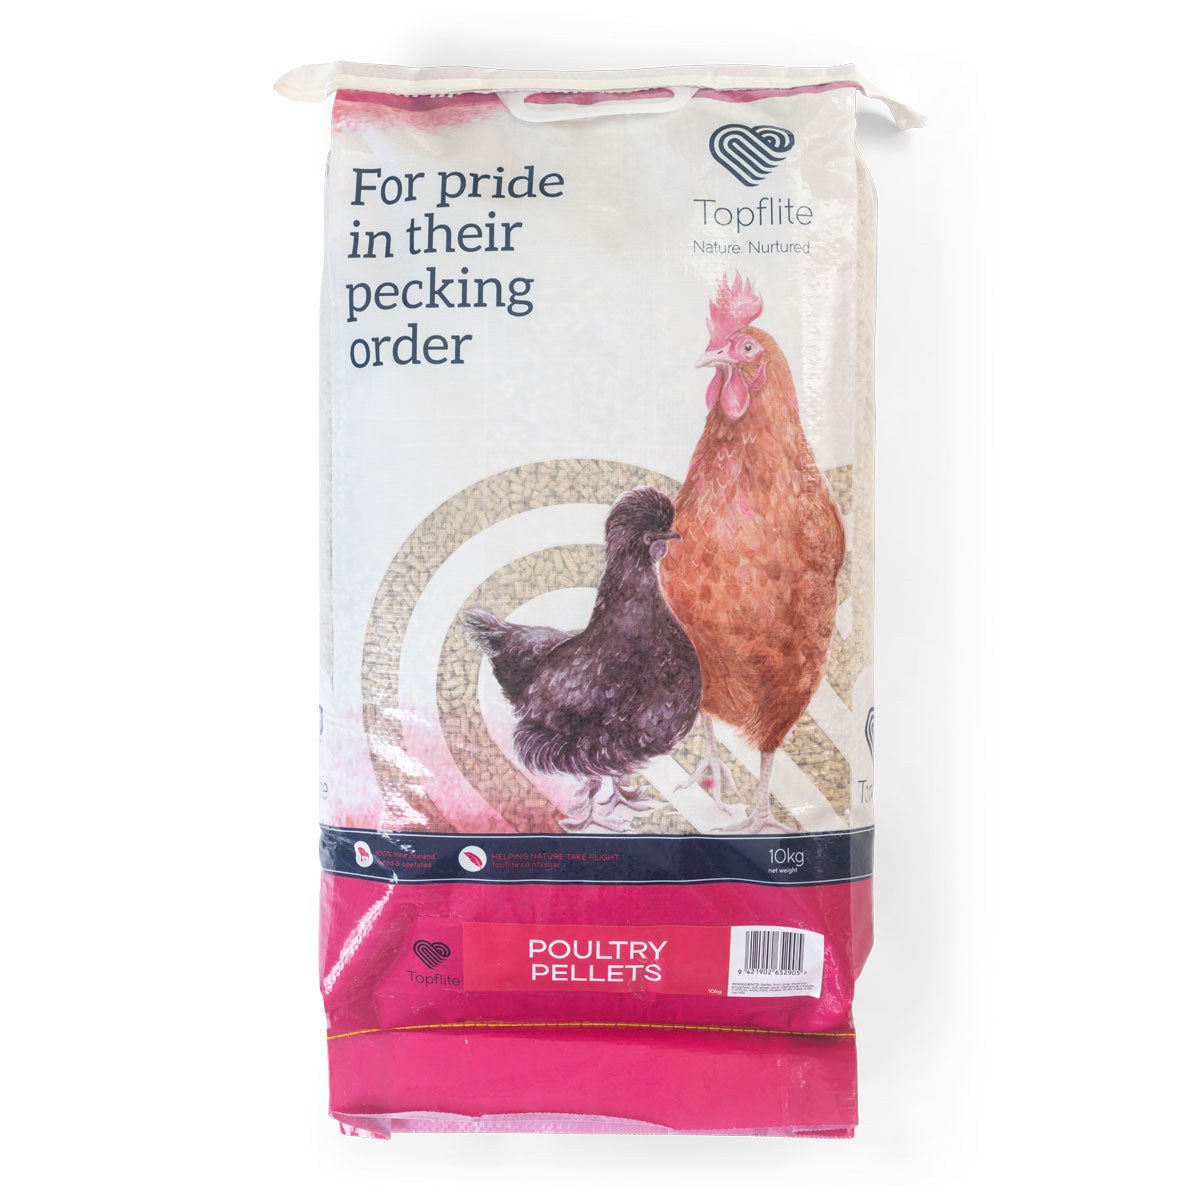 Goodie Goodie Chicken Feed Subscription